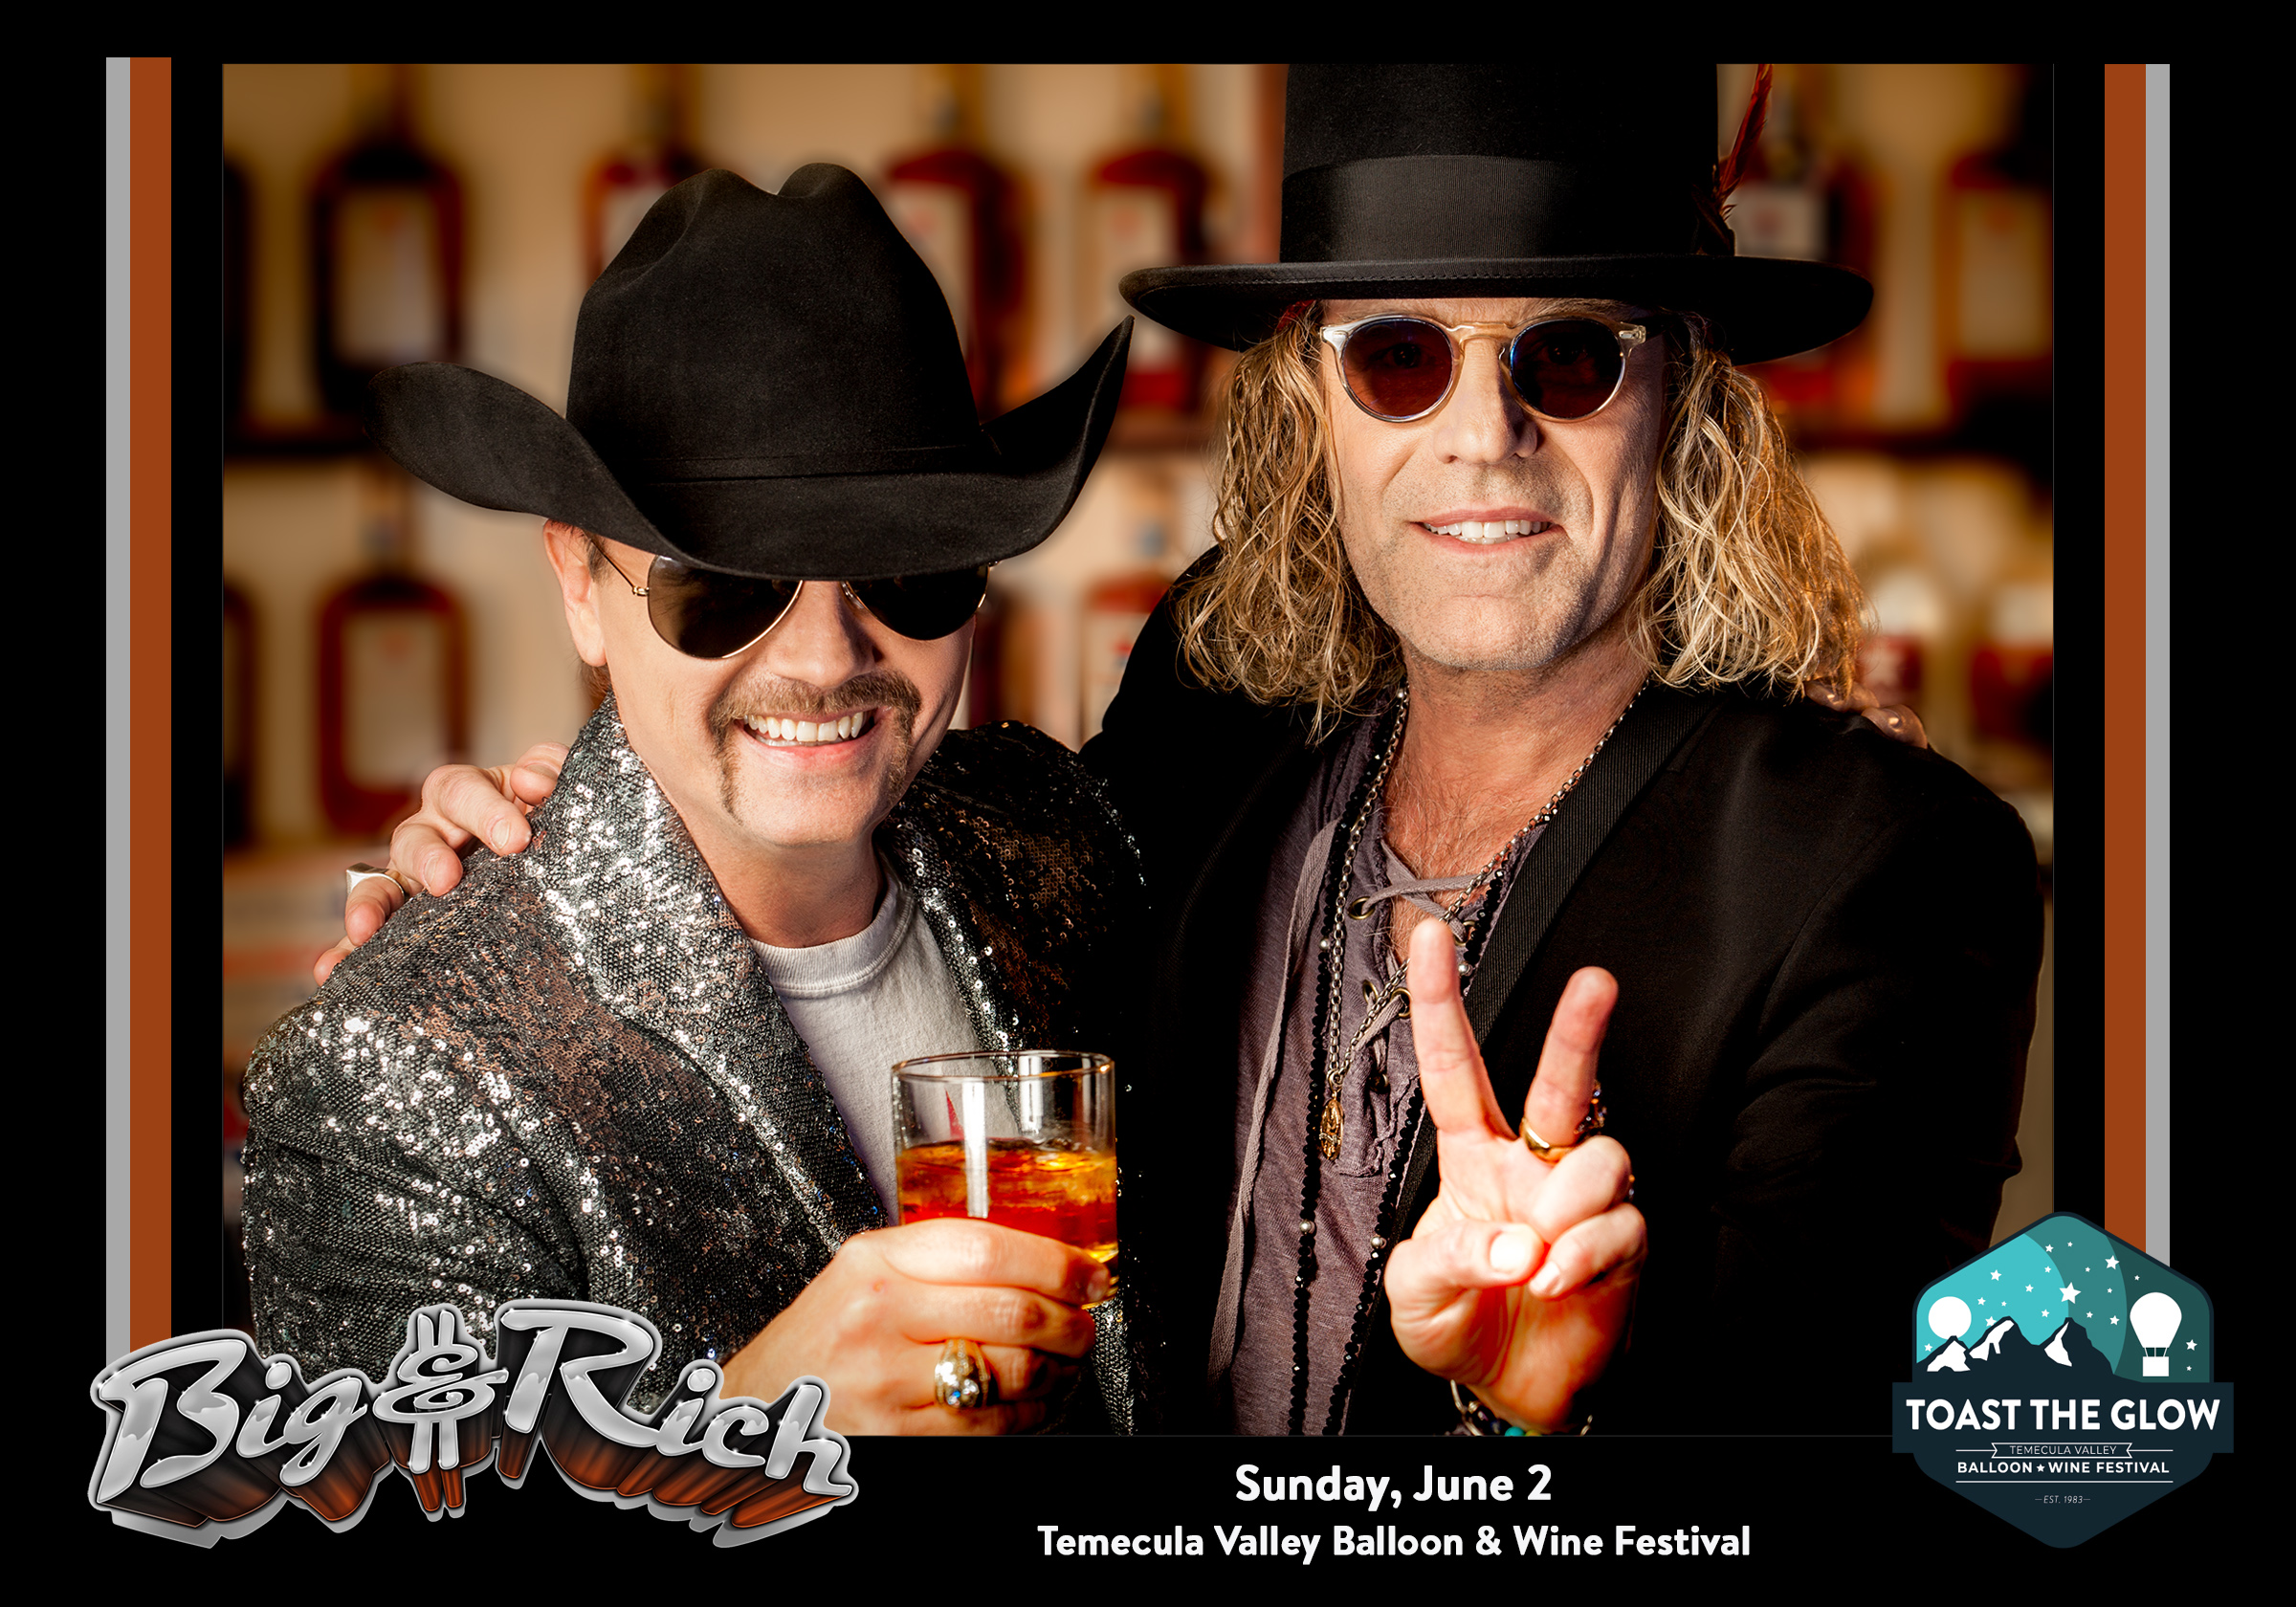 Big & Rich headline Sunday Country Funday, June 2 at the Temecula Valley Balloon & Wine Festival